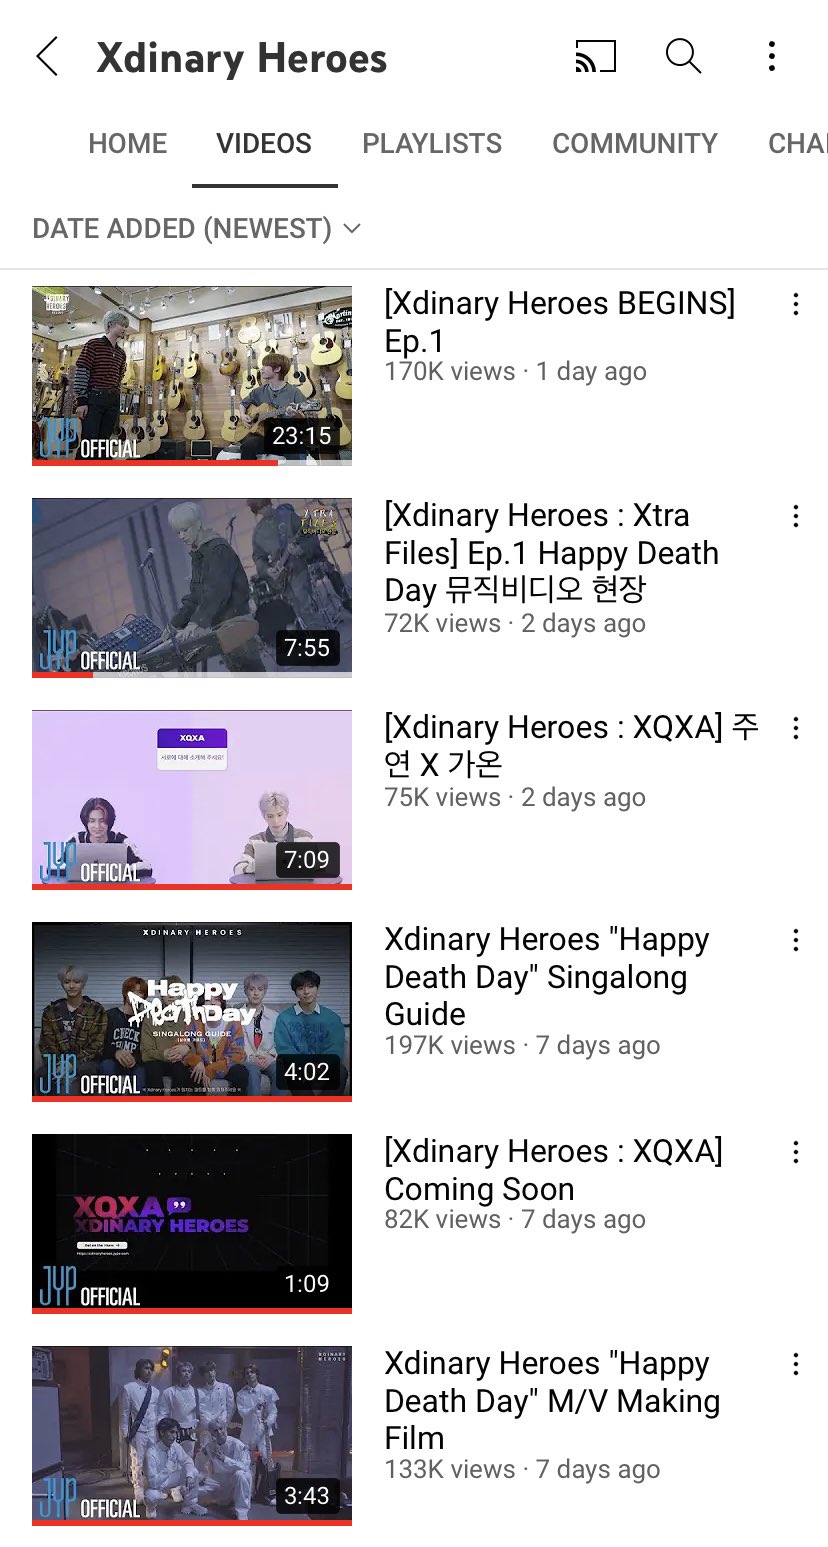 nala on X: Xdinary Heroes have their own  channel for the contents.  Currently we have XQXA, Xtra Files, and XH Begins as our weekly content.  They all just started (Ep. 1)